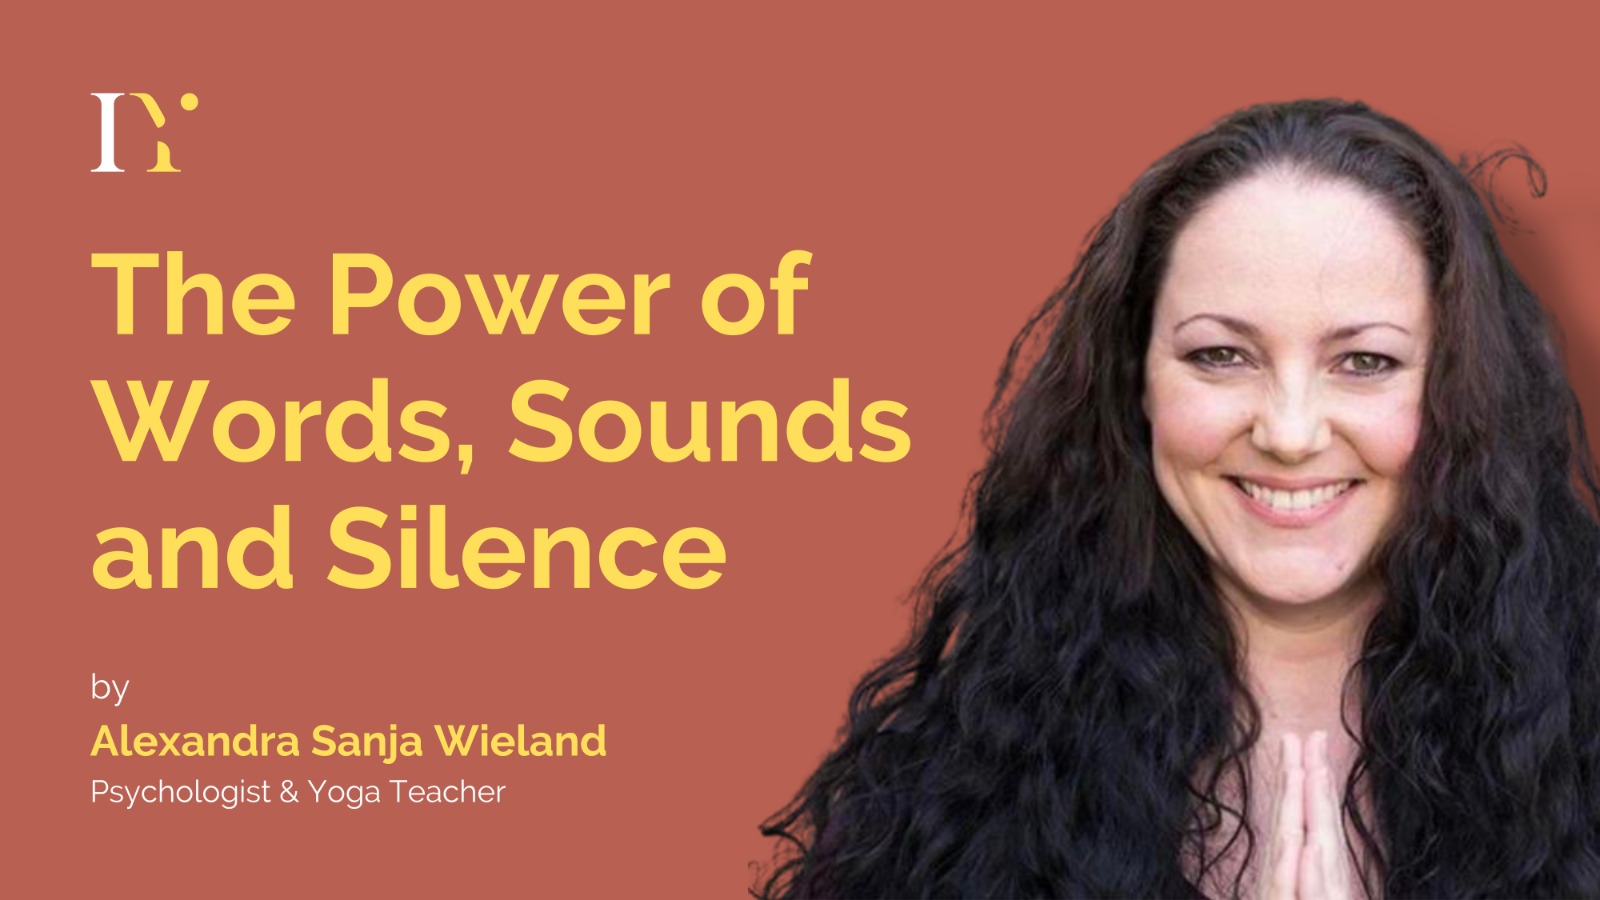 The Power of Words, Sounds and Silence by Alexandra Sanja Wieland